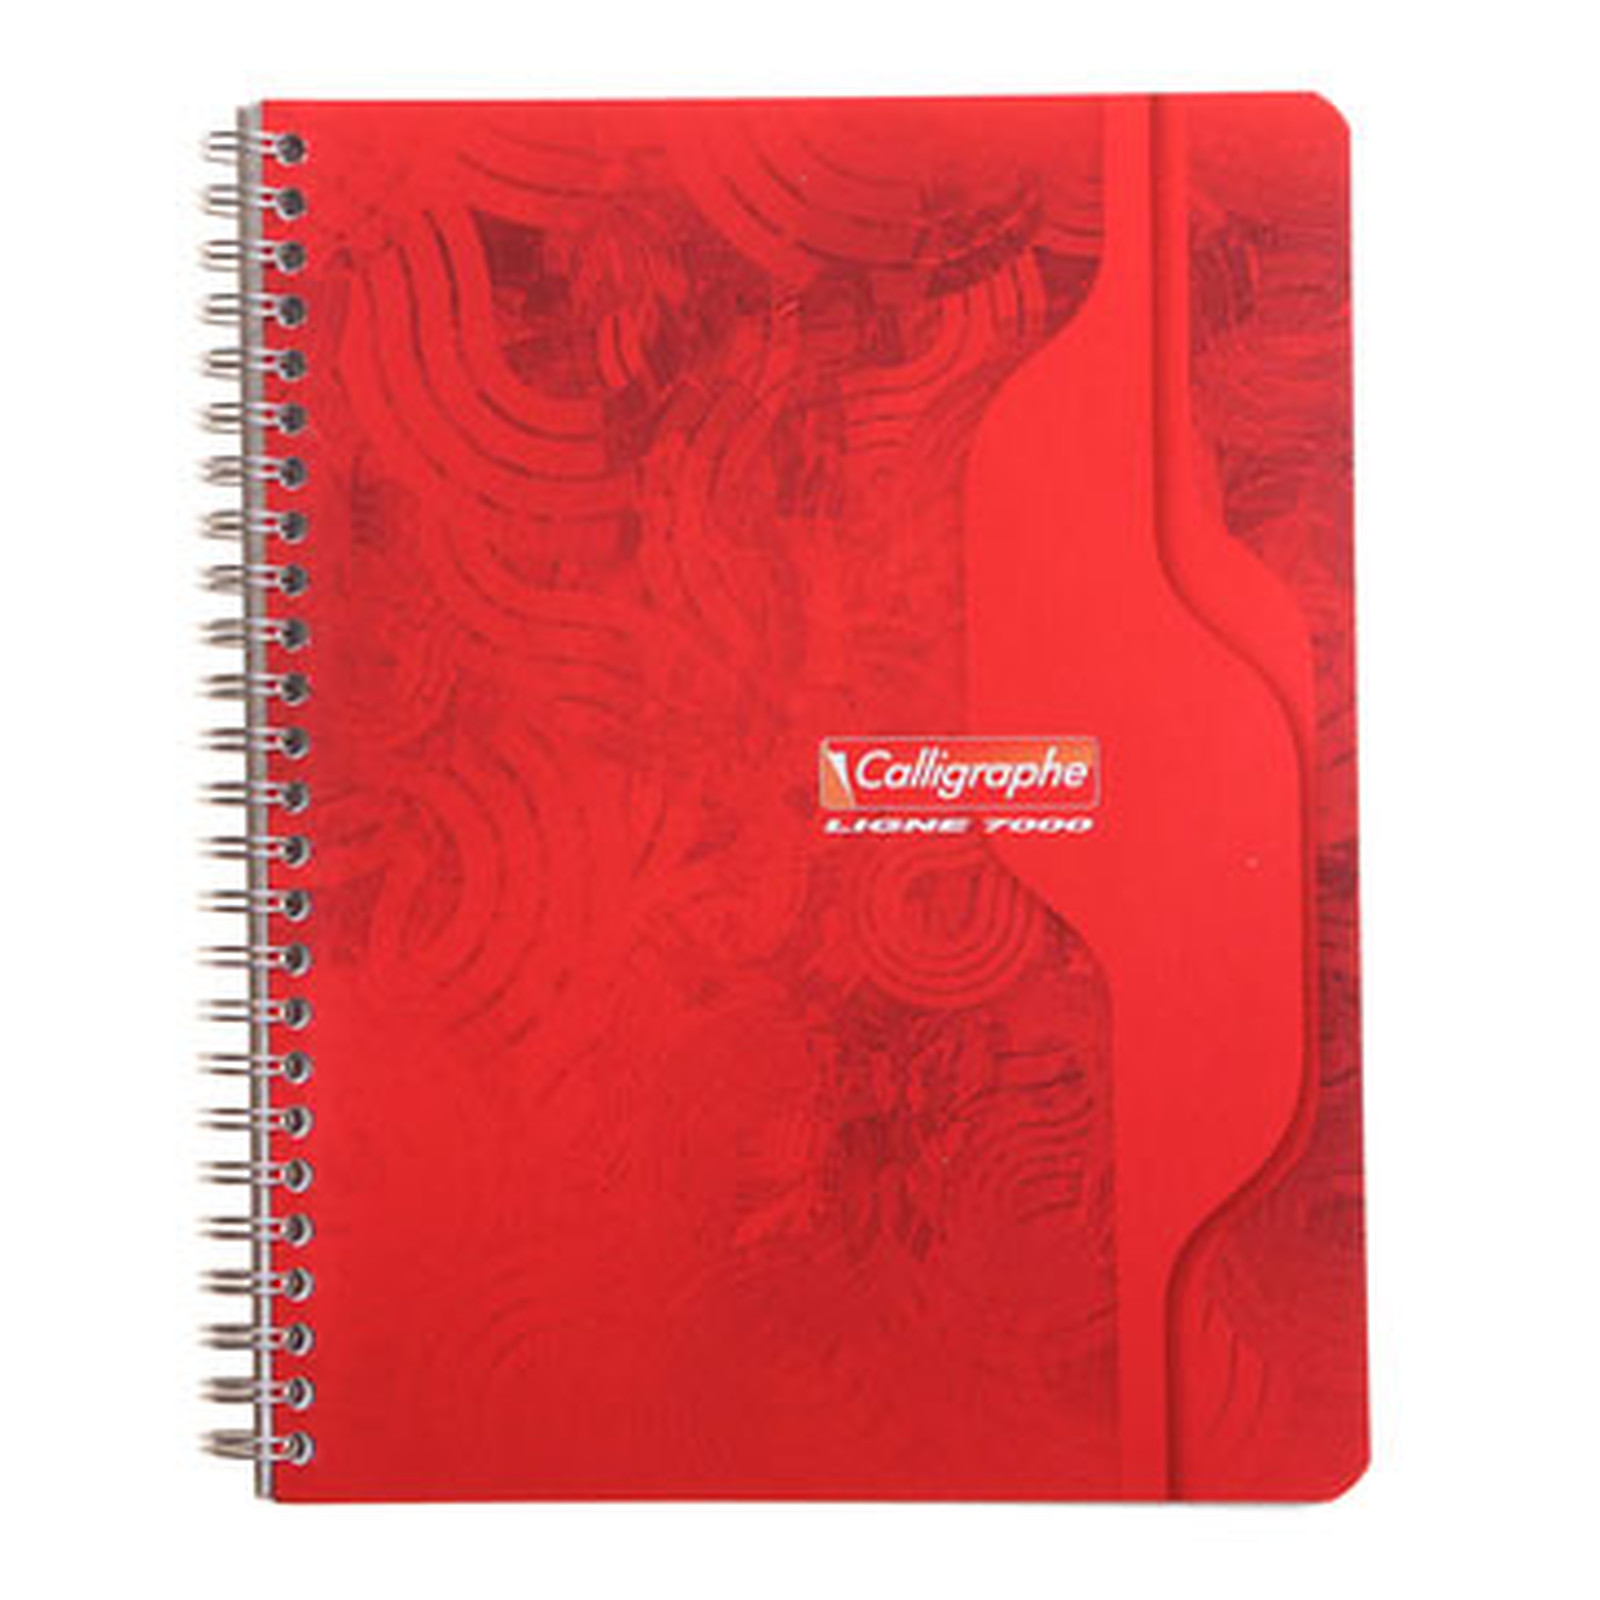 Calligraphe 7000 Cahier A5+ 180 pages 70g petits carreaux - Cahier Calligraphe